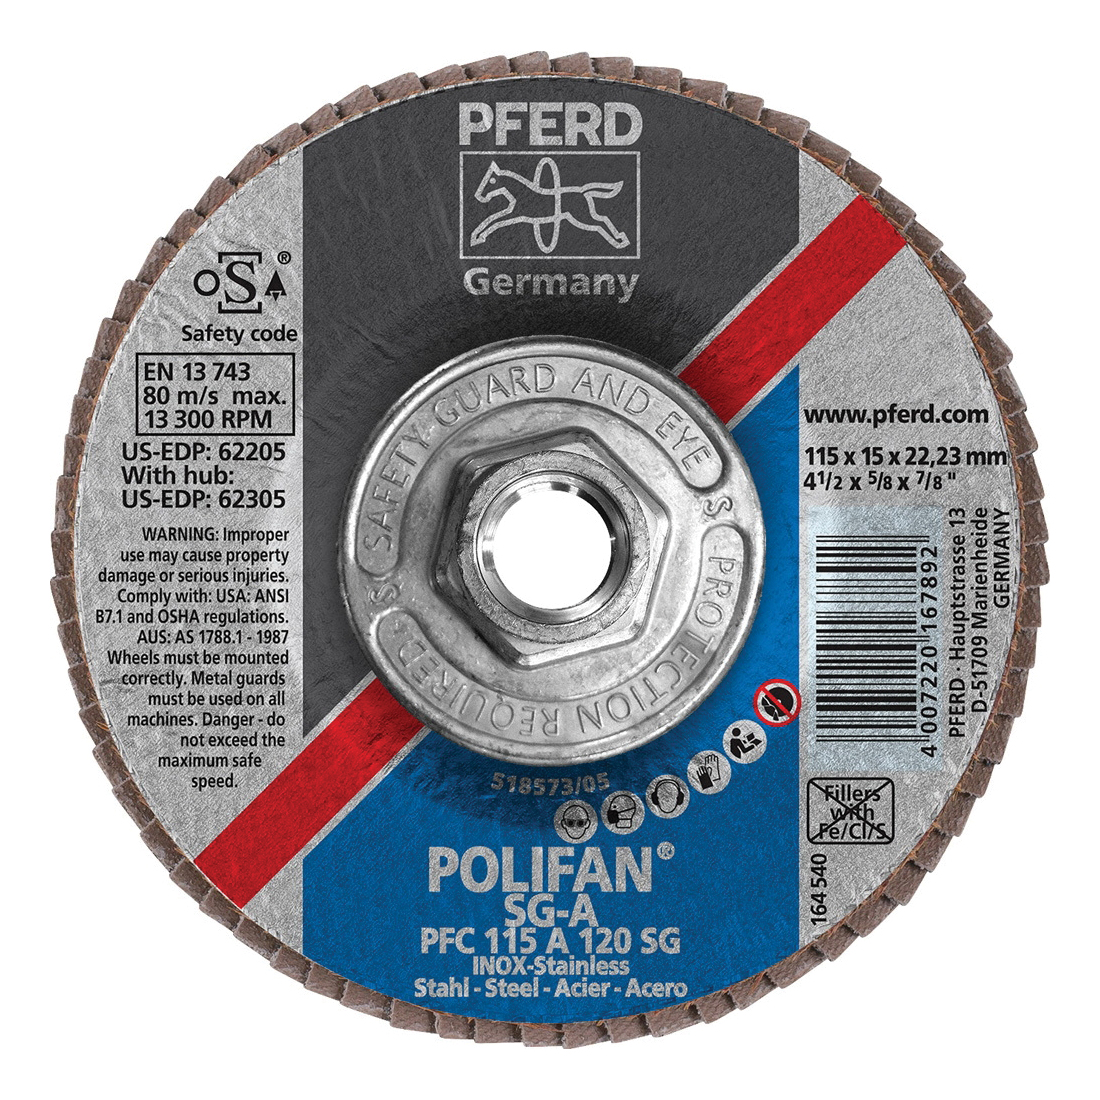 PFERD Polifan® 62305 Performance Line SG A Threaded Coated Abrasive Flap Disc, 4-1/2 in Dia, 120 Grit, Aluminum Oxide Abrasive, Type 29 Conical Disc